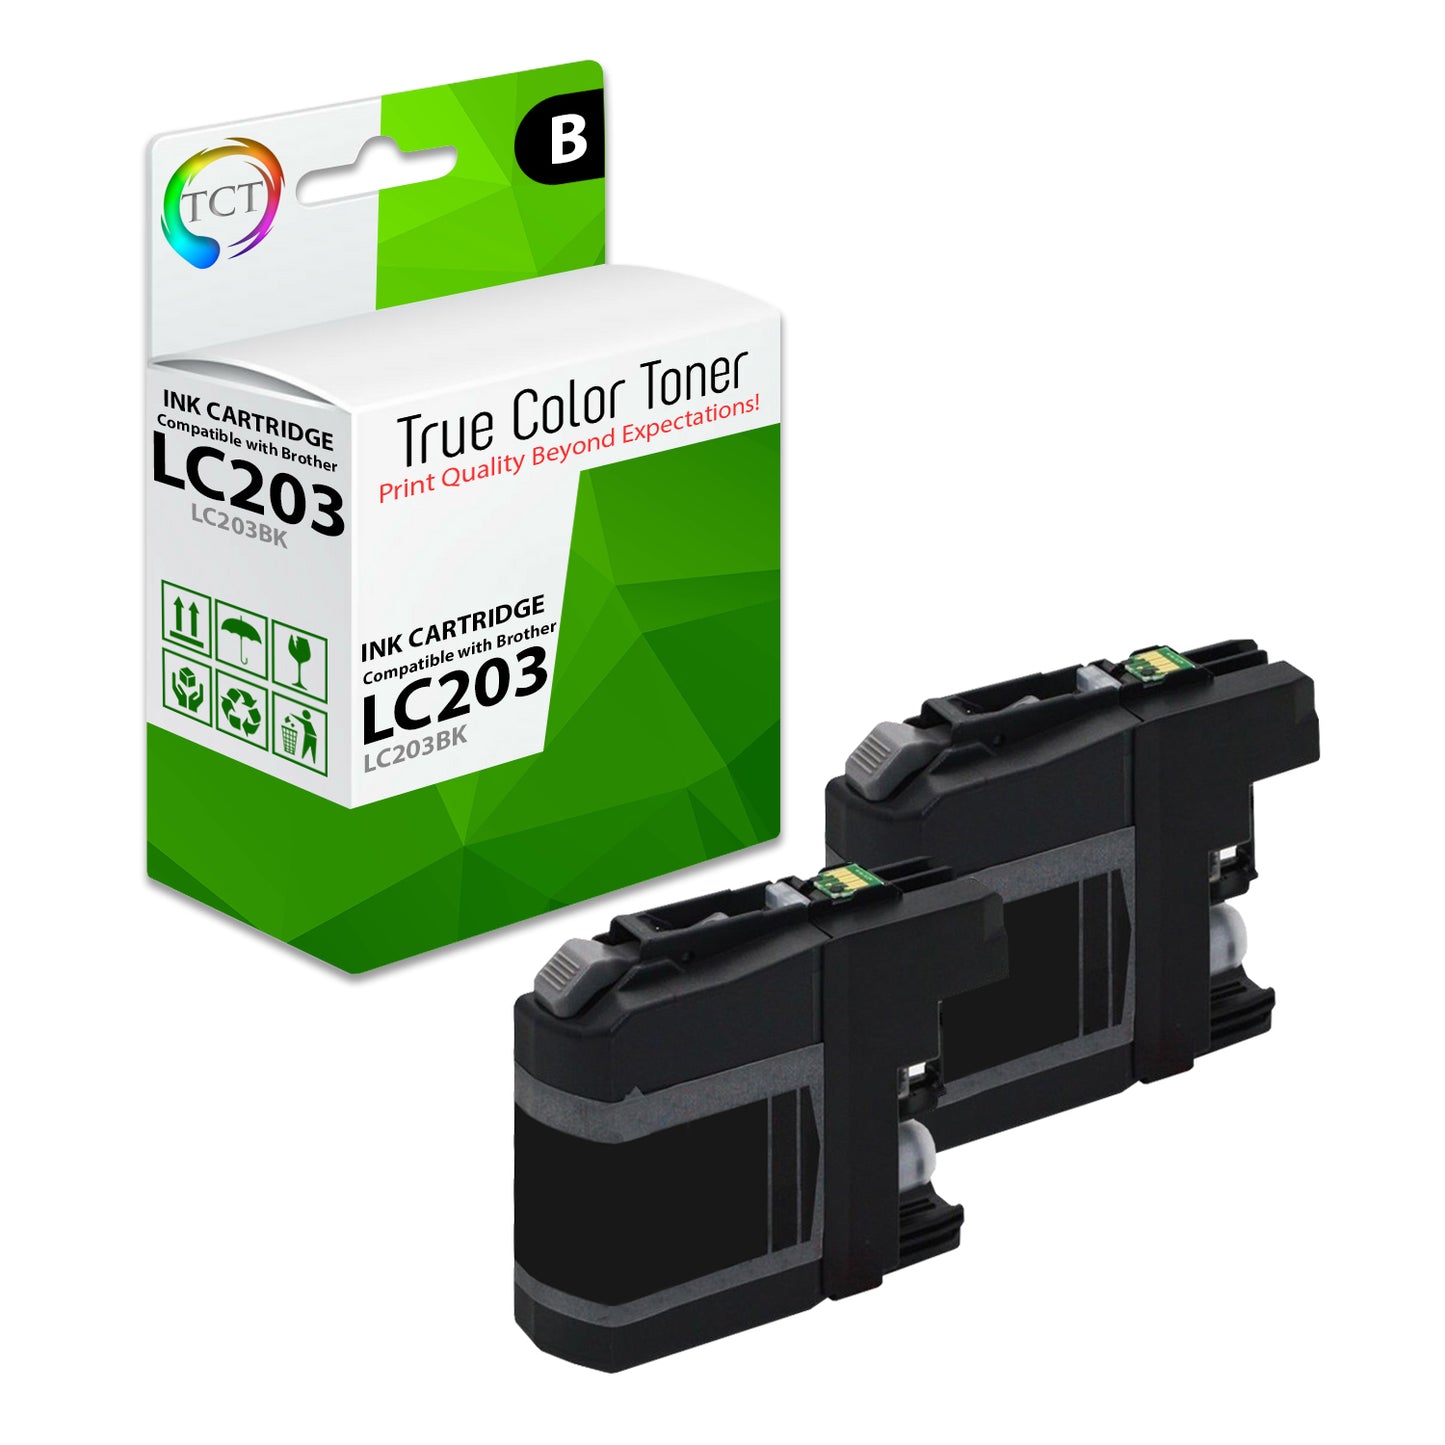 TCT Compatible Ink Cartridge Replacement for the Brother LC203 Series - 2 Pack Black